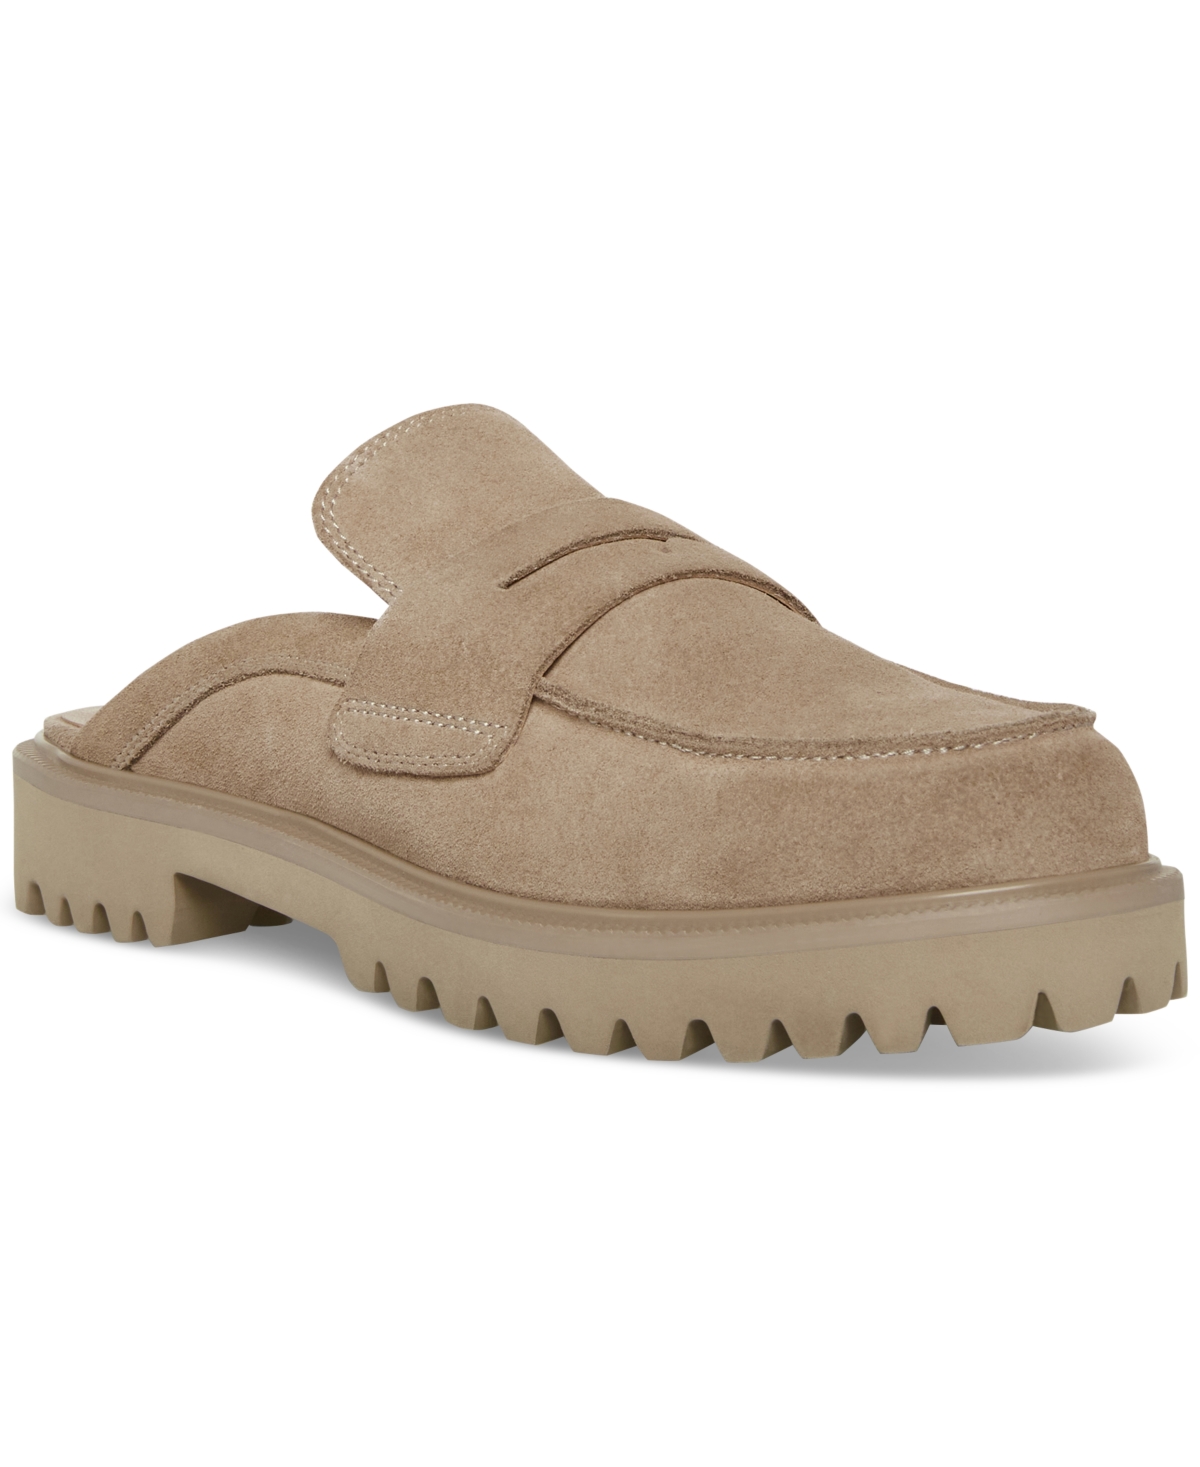 Women's Fever Slip-On Penny Loafer Mule Flats - Sand Suede